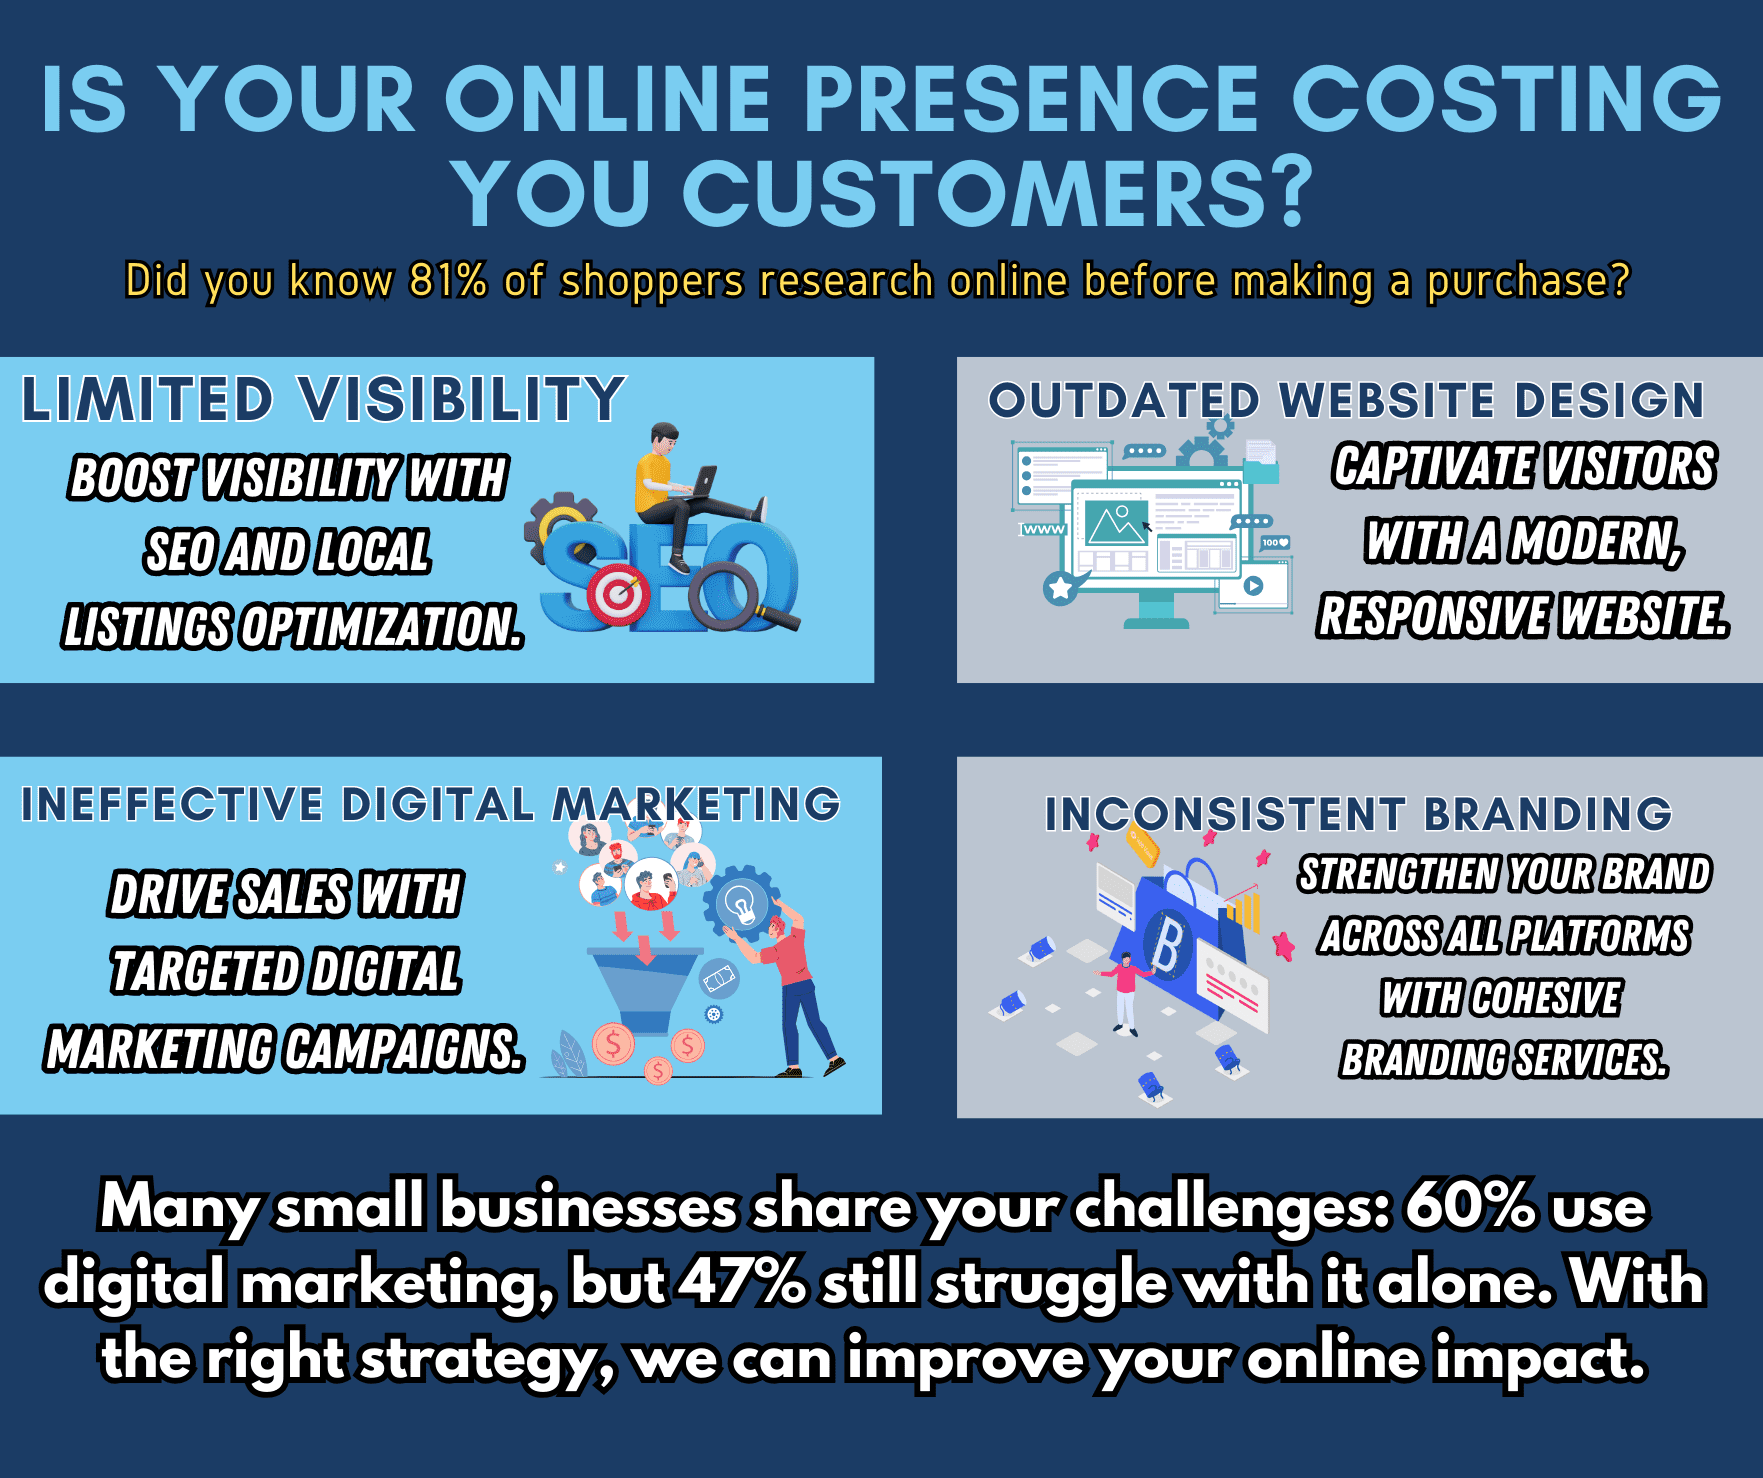 Infographic examining how poor online presence is costing businesses customers, emphasizing the importance of visibility, website design, digital marketing, and branding.